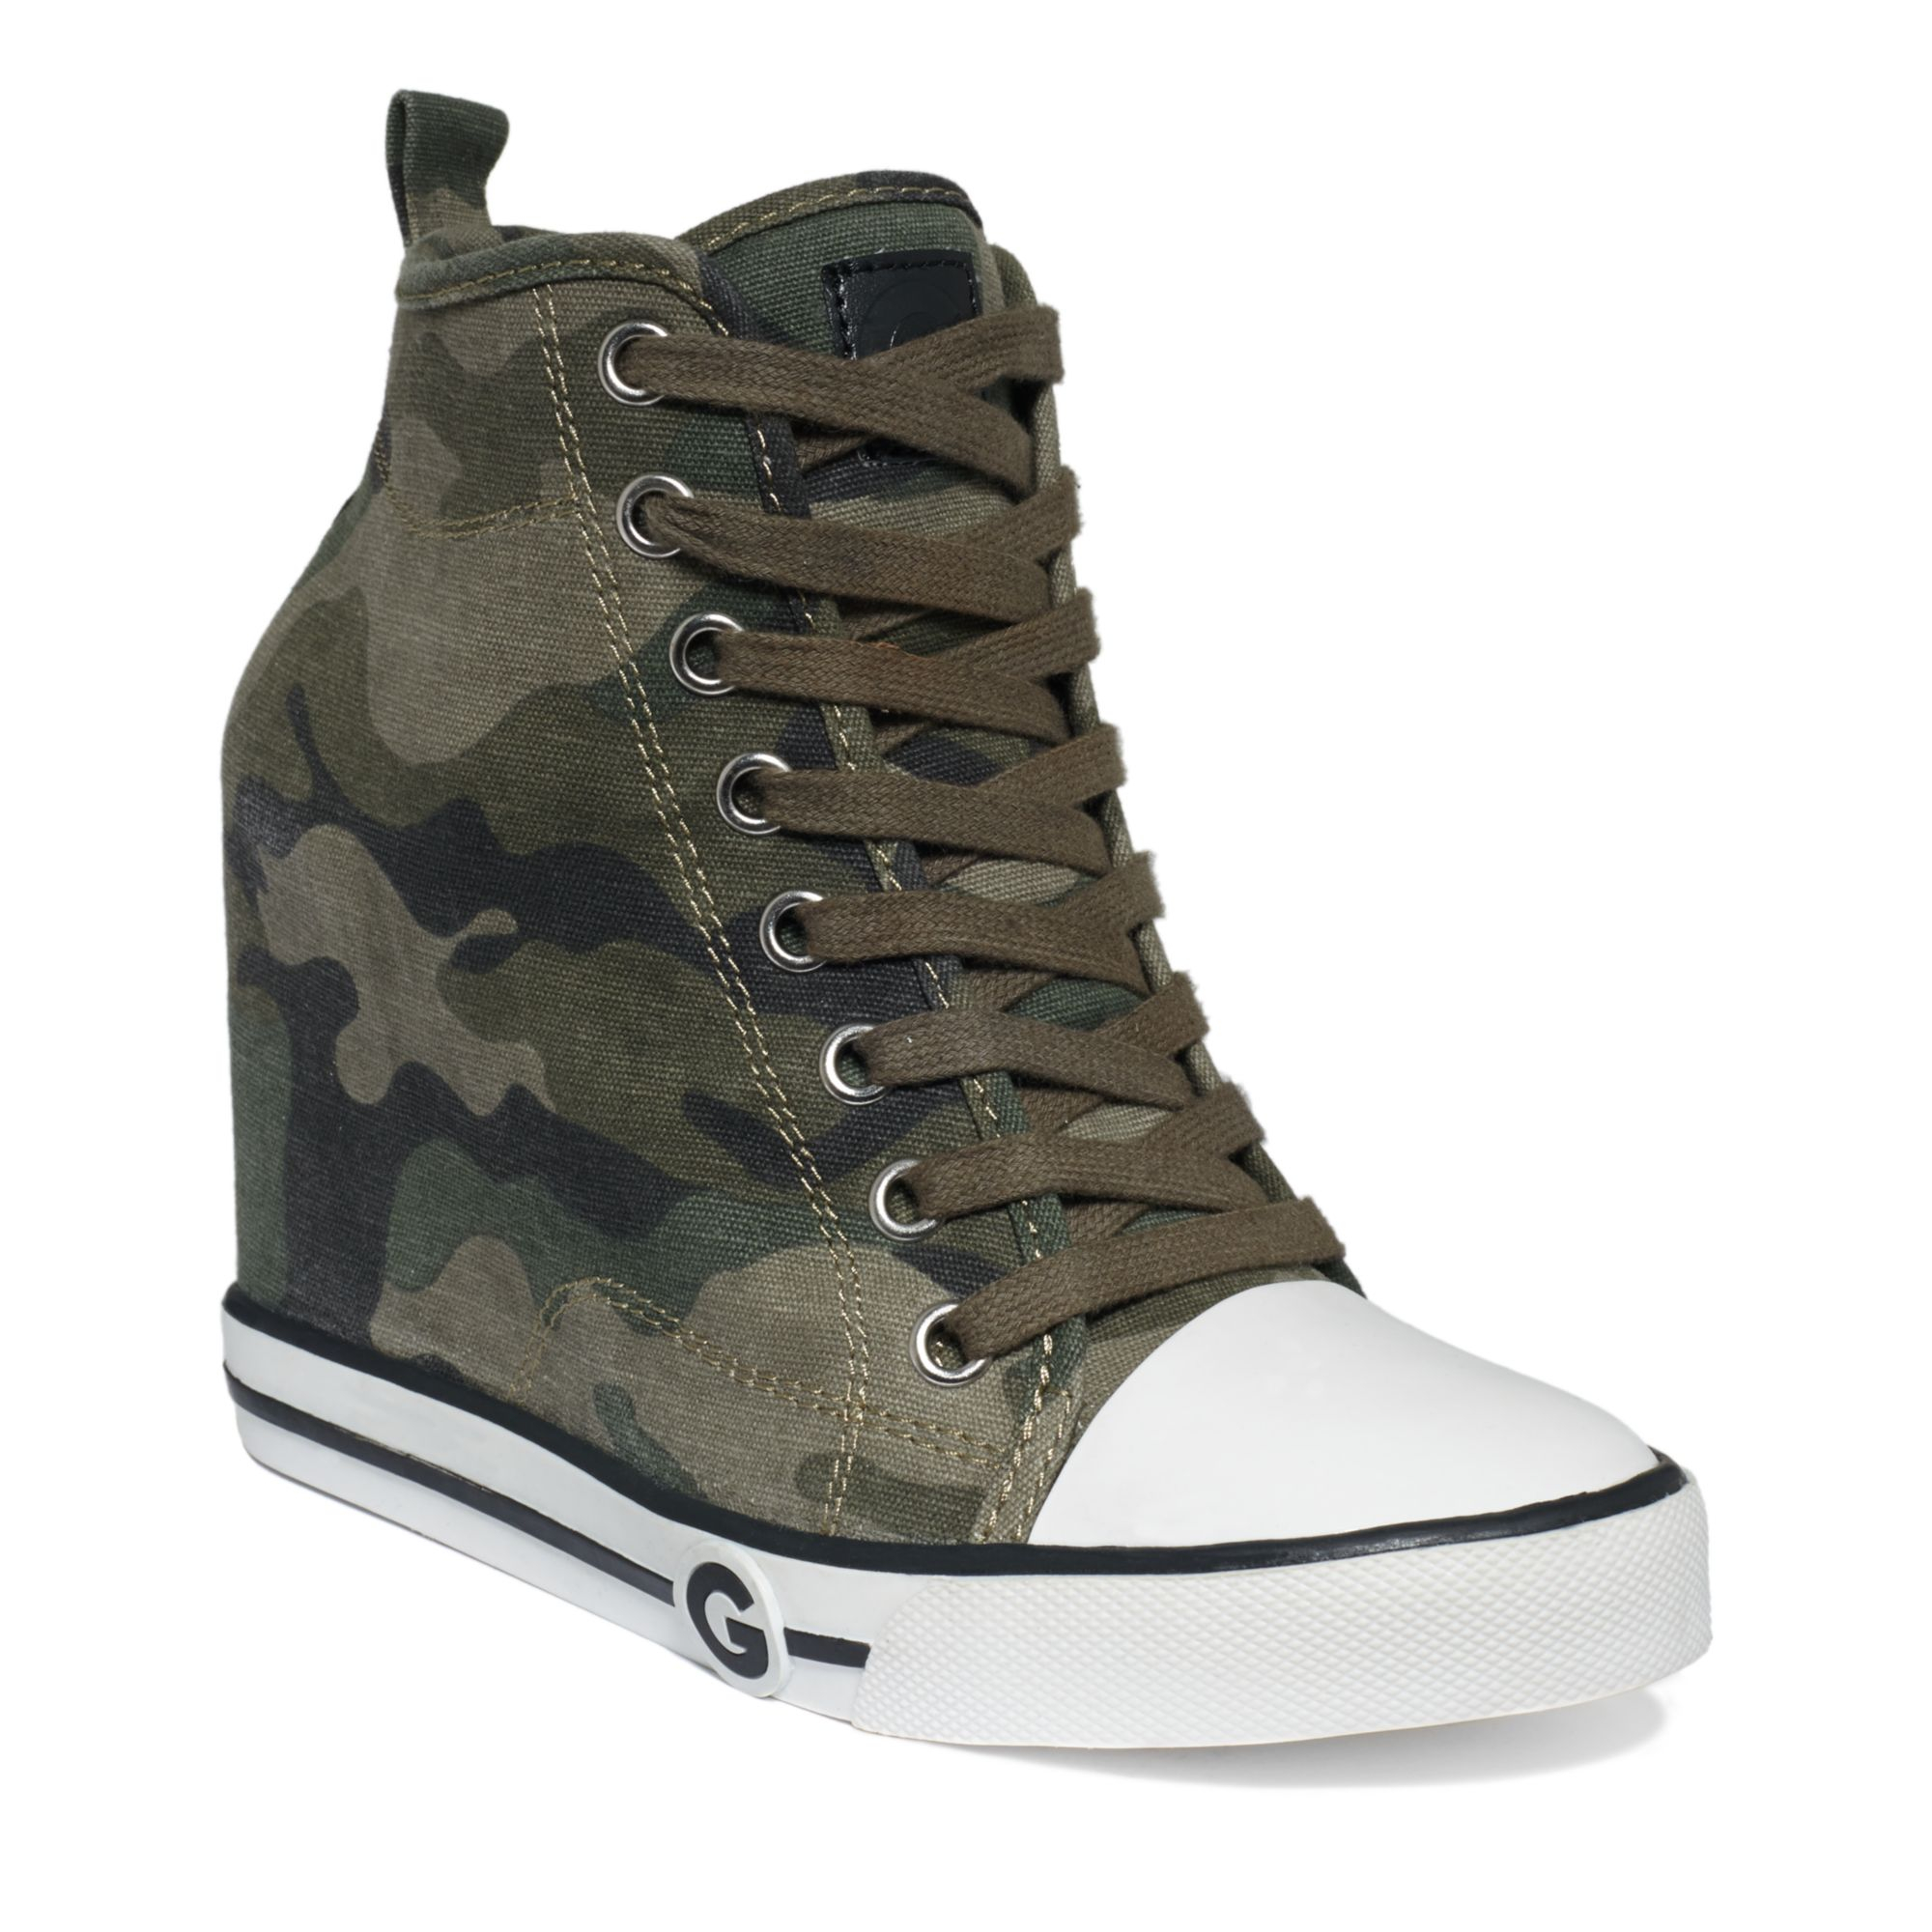 Shoes Stores Near Me: Women S Wedge Sneakers